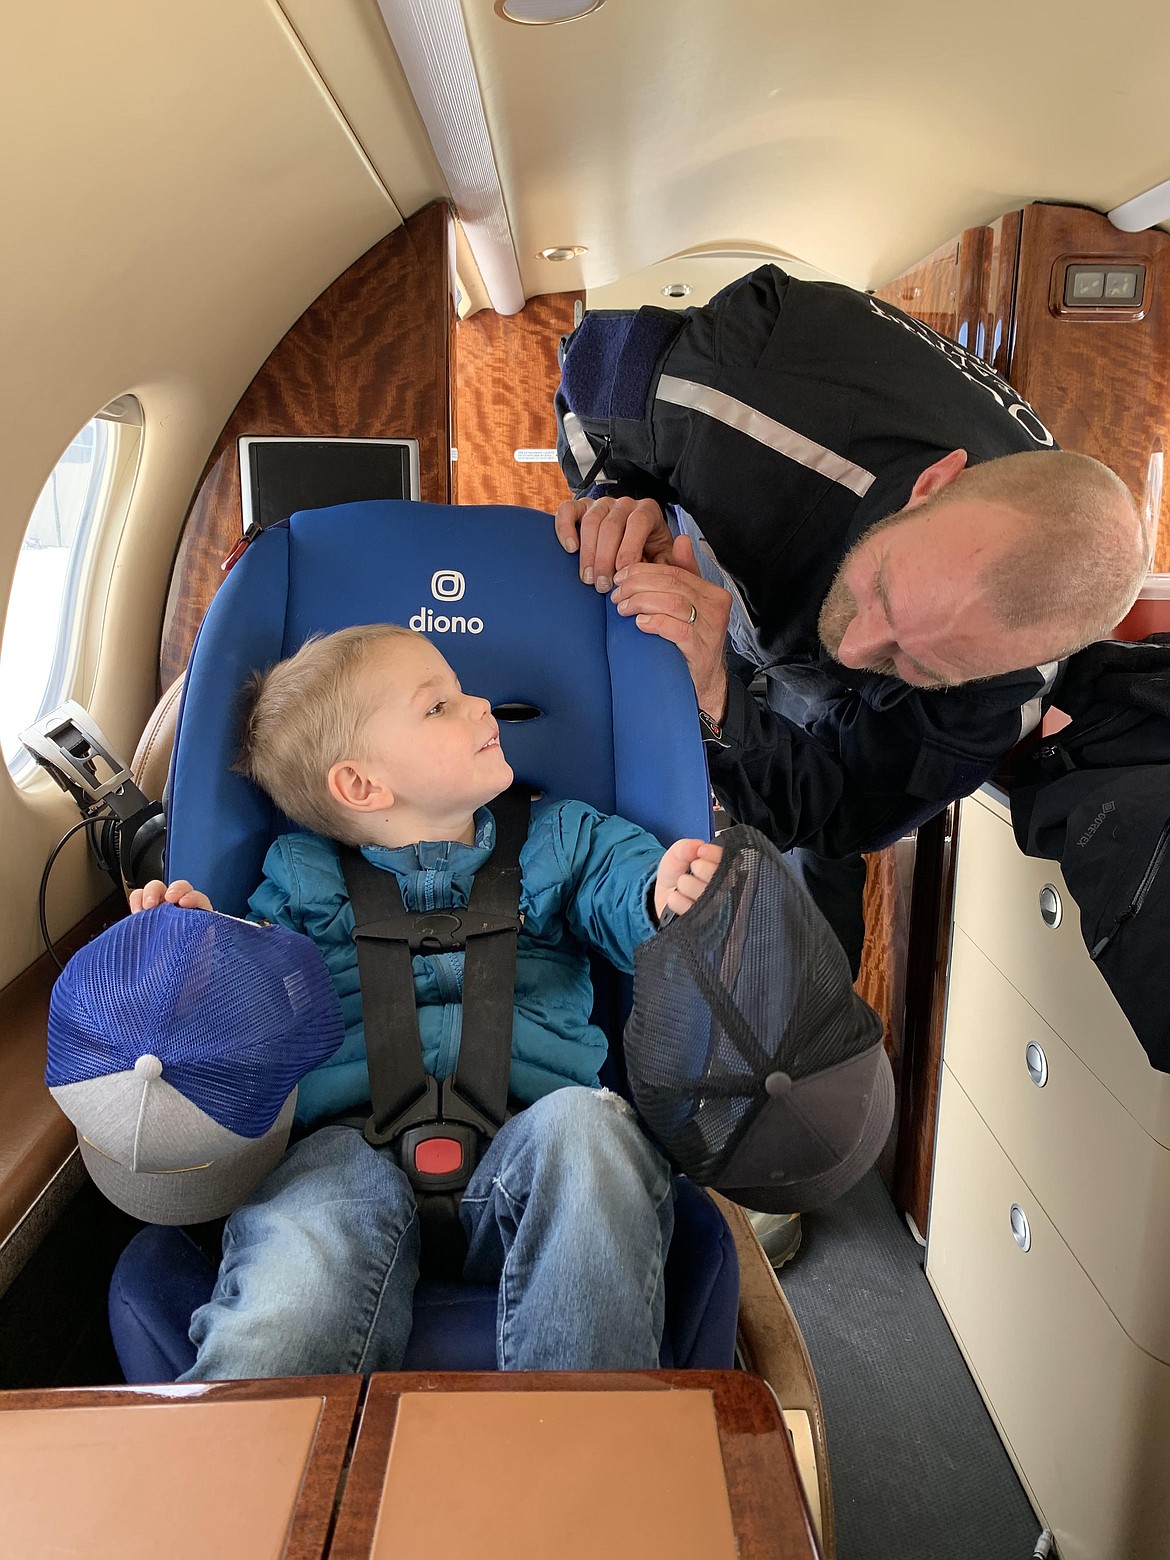 A.L.E.R.T. personnel with Kate and Lewis Johnson's son Ryder after their flight to Colorado. Lewis Johnson required specialty neurological care at Craig Hospital in Denver, Colorado after being ran over by a fleeing suspect in February of 2023. (photo provided)